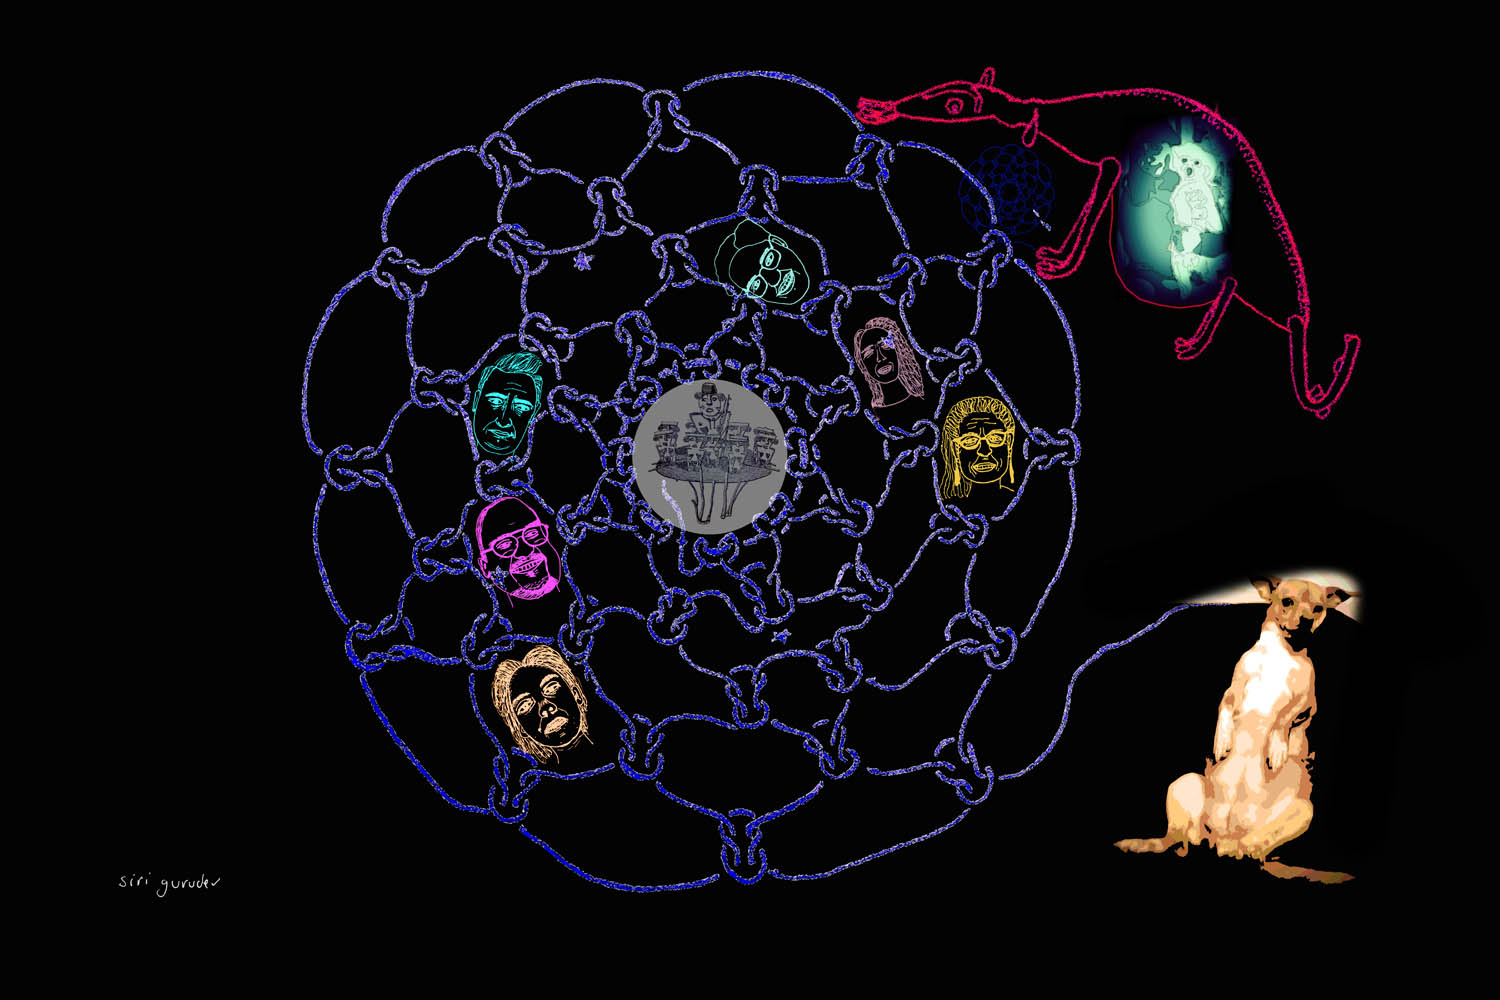 Surreal digital art with a circle of blue knotted rope emanating from an image of a chihuahua on a black background. Between the gaps of the knots are brightly colored drawn faces. In the right corner is a red creature with an image of a dog in its belly.